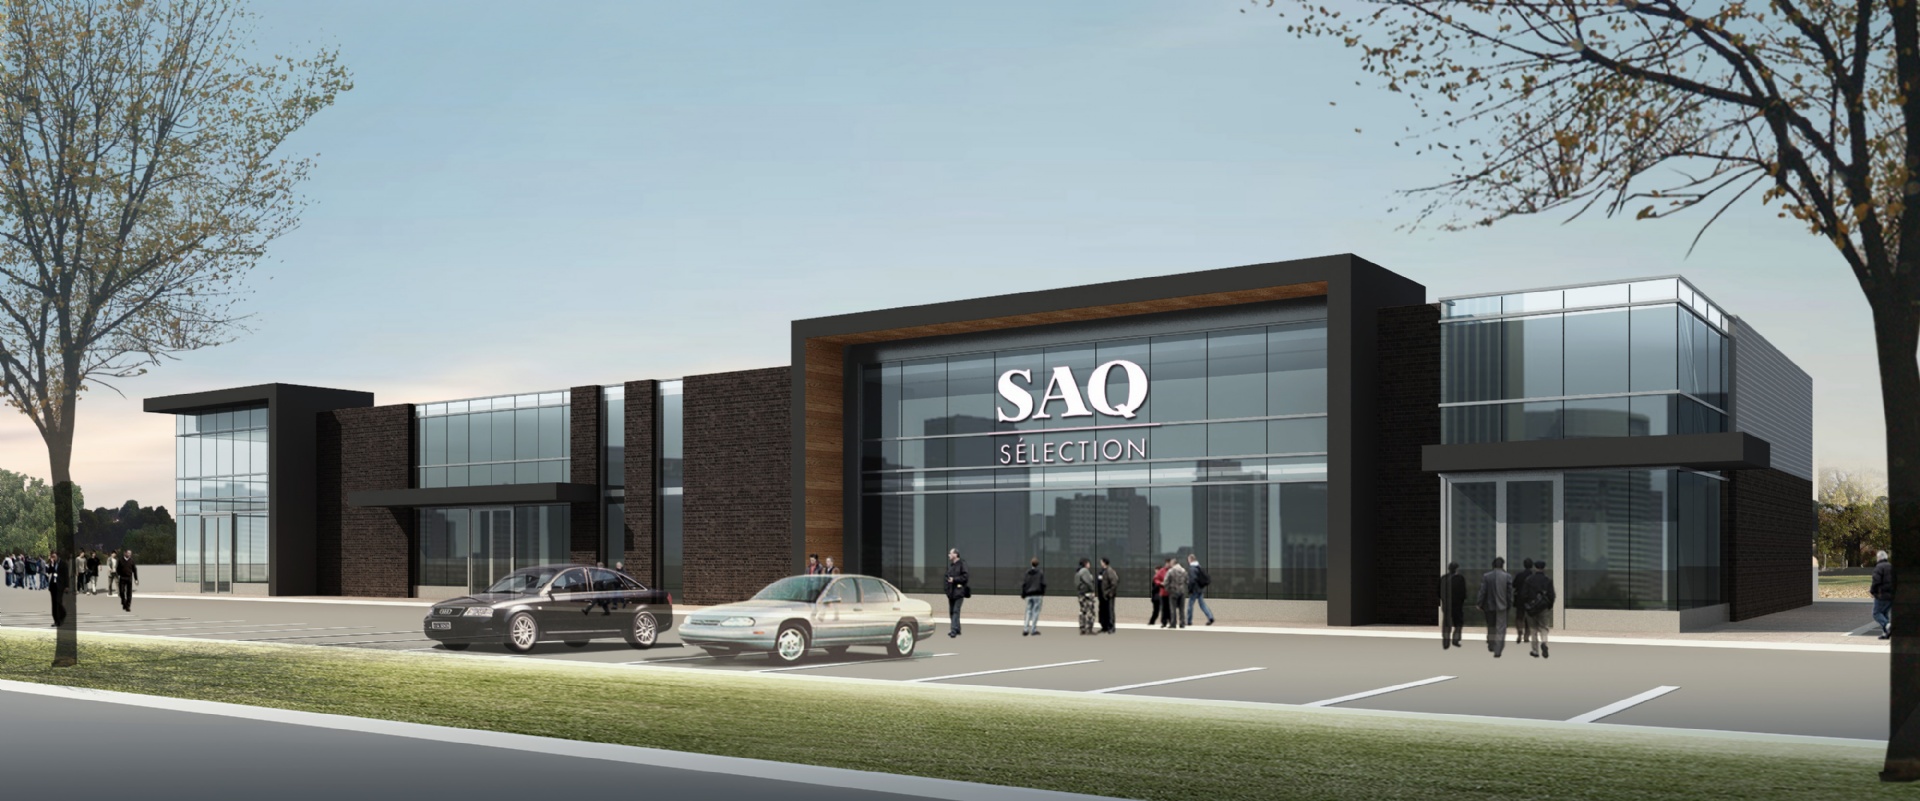 SAQ Joliette | Architex Group | Montreal-based architectural design firm | SAQ Joliette | Architectural design firm offering architectural project programming, architectural design & implementation based in Montreal.